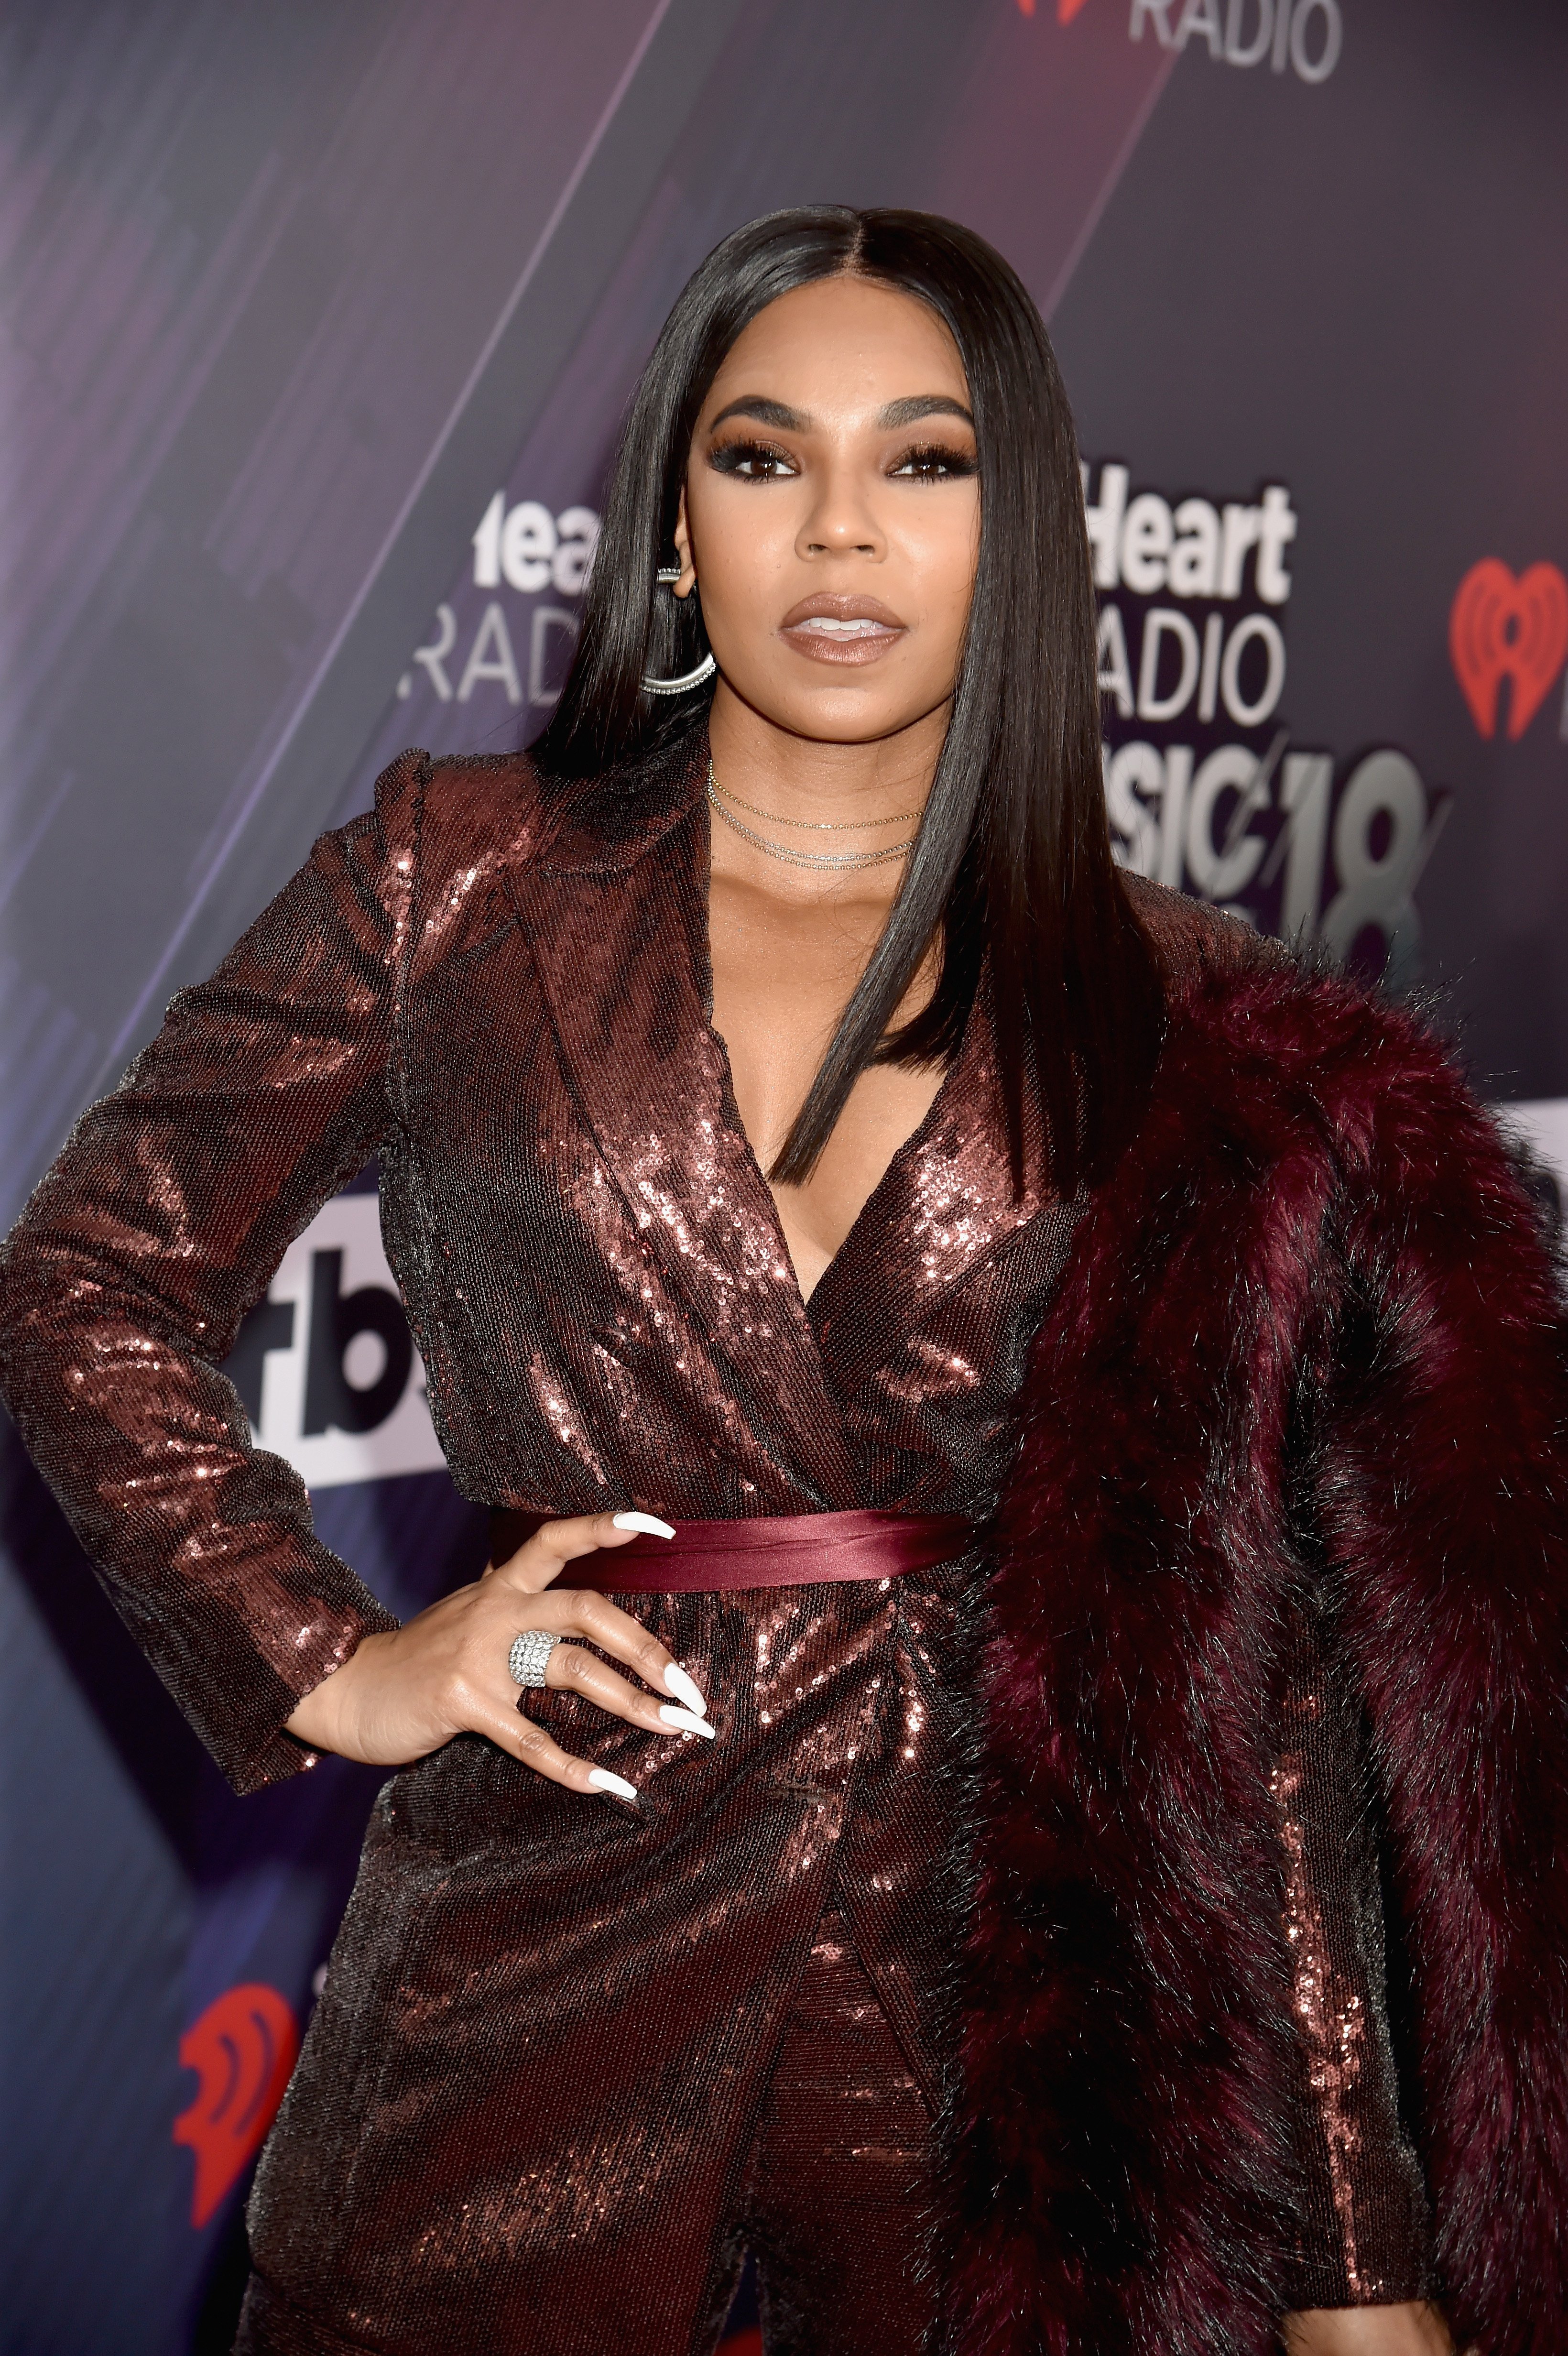 Ashanti at the iHeartRadio Music Awards on March 11, 2018 in Inglewood, California | Photo: Getty Images